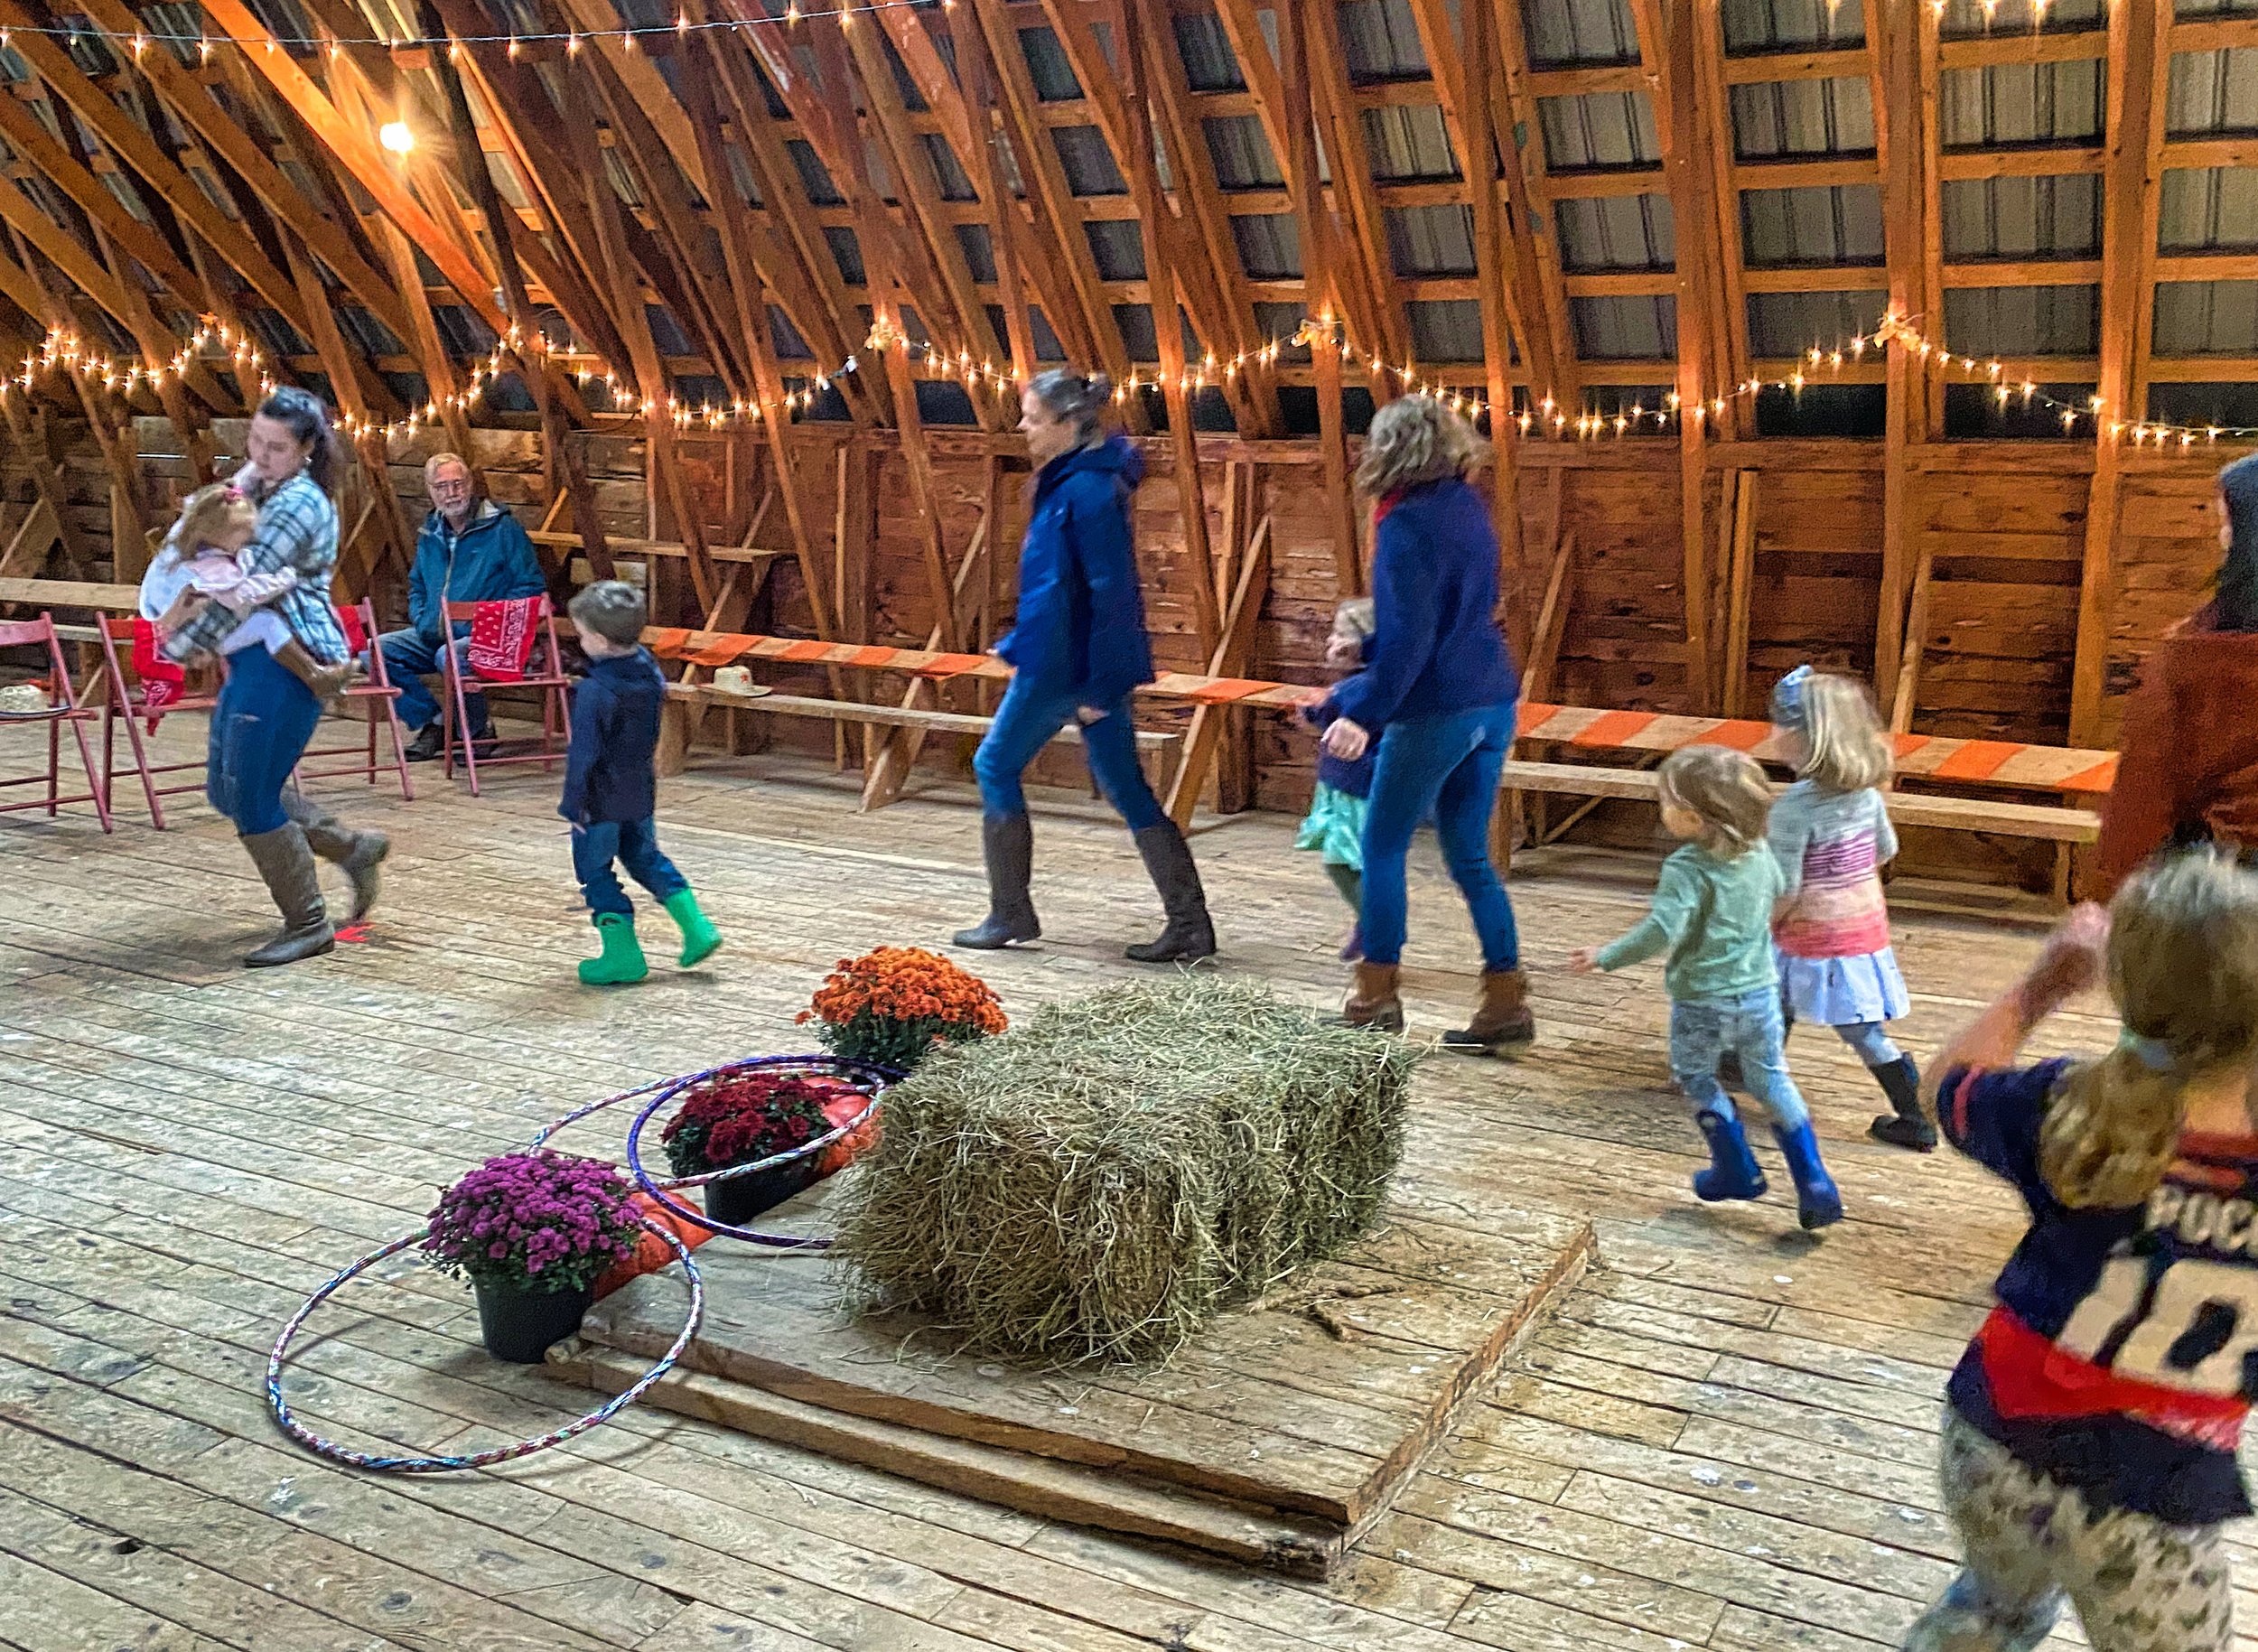  Beard’s Barn has been the site for the Barn Dance for decades. Photo by Gordon Miller  